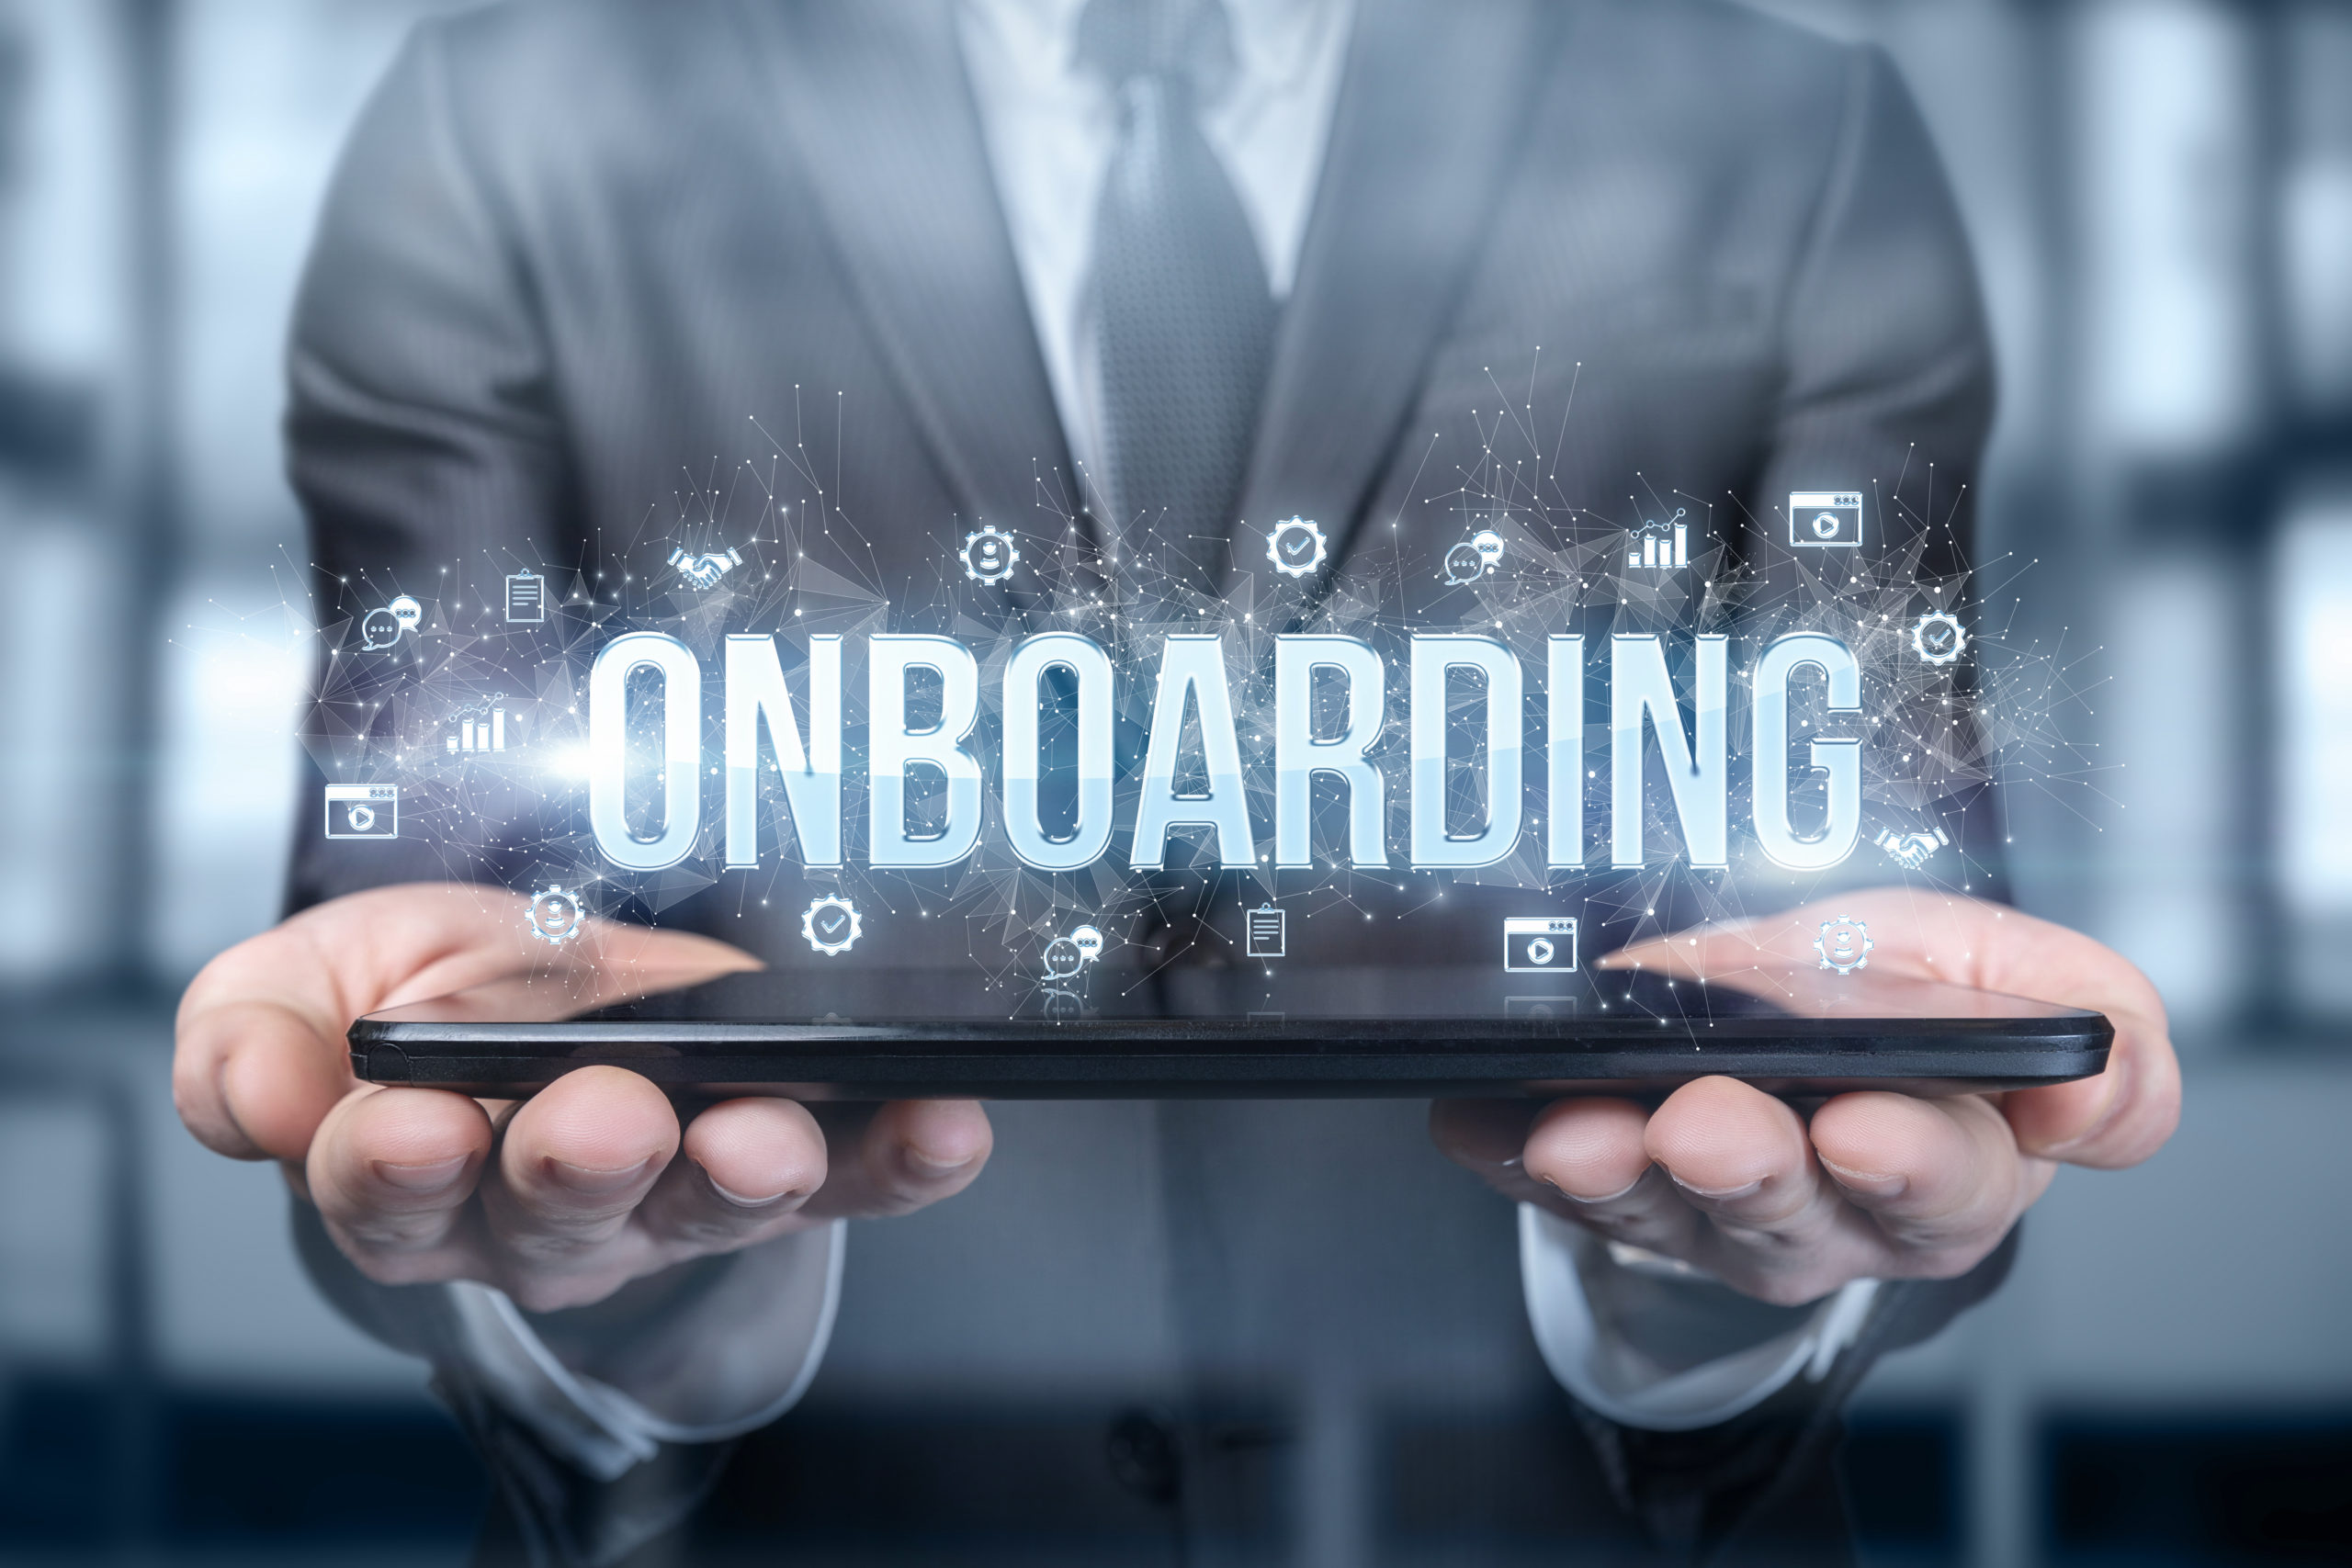 New Client Onboarding Checklist - 7 easy steps for MSPs